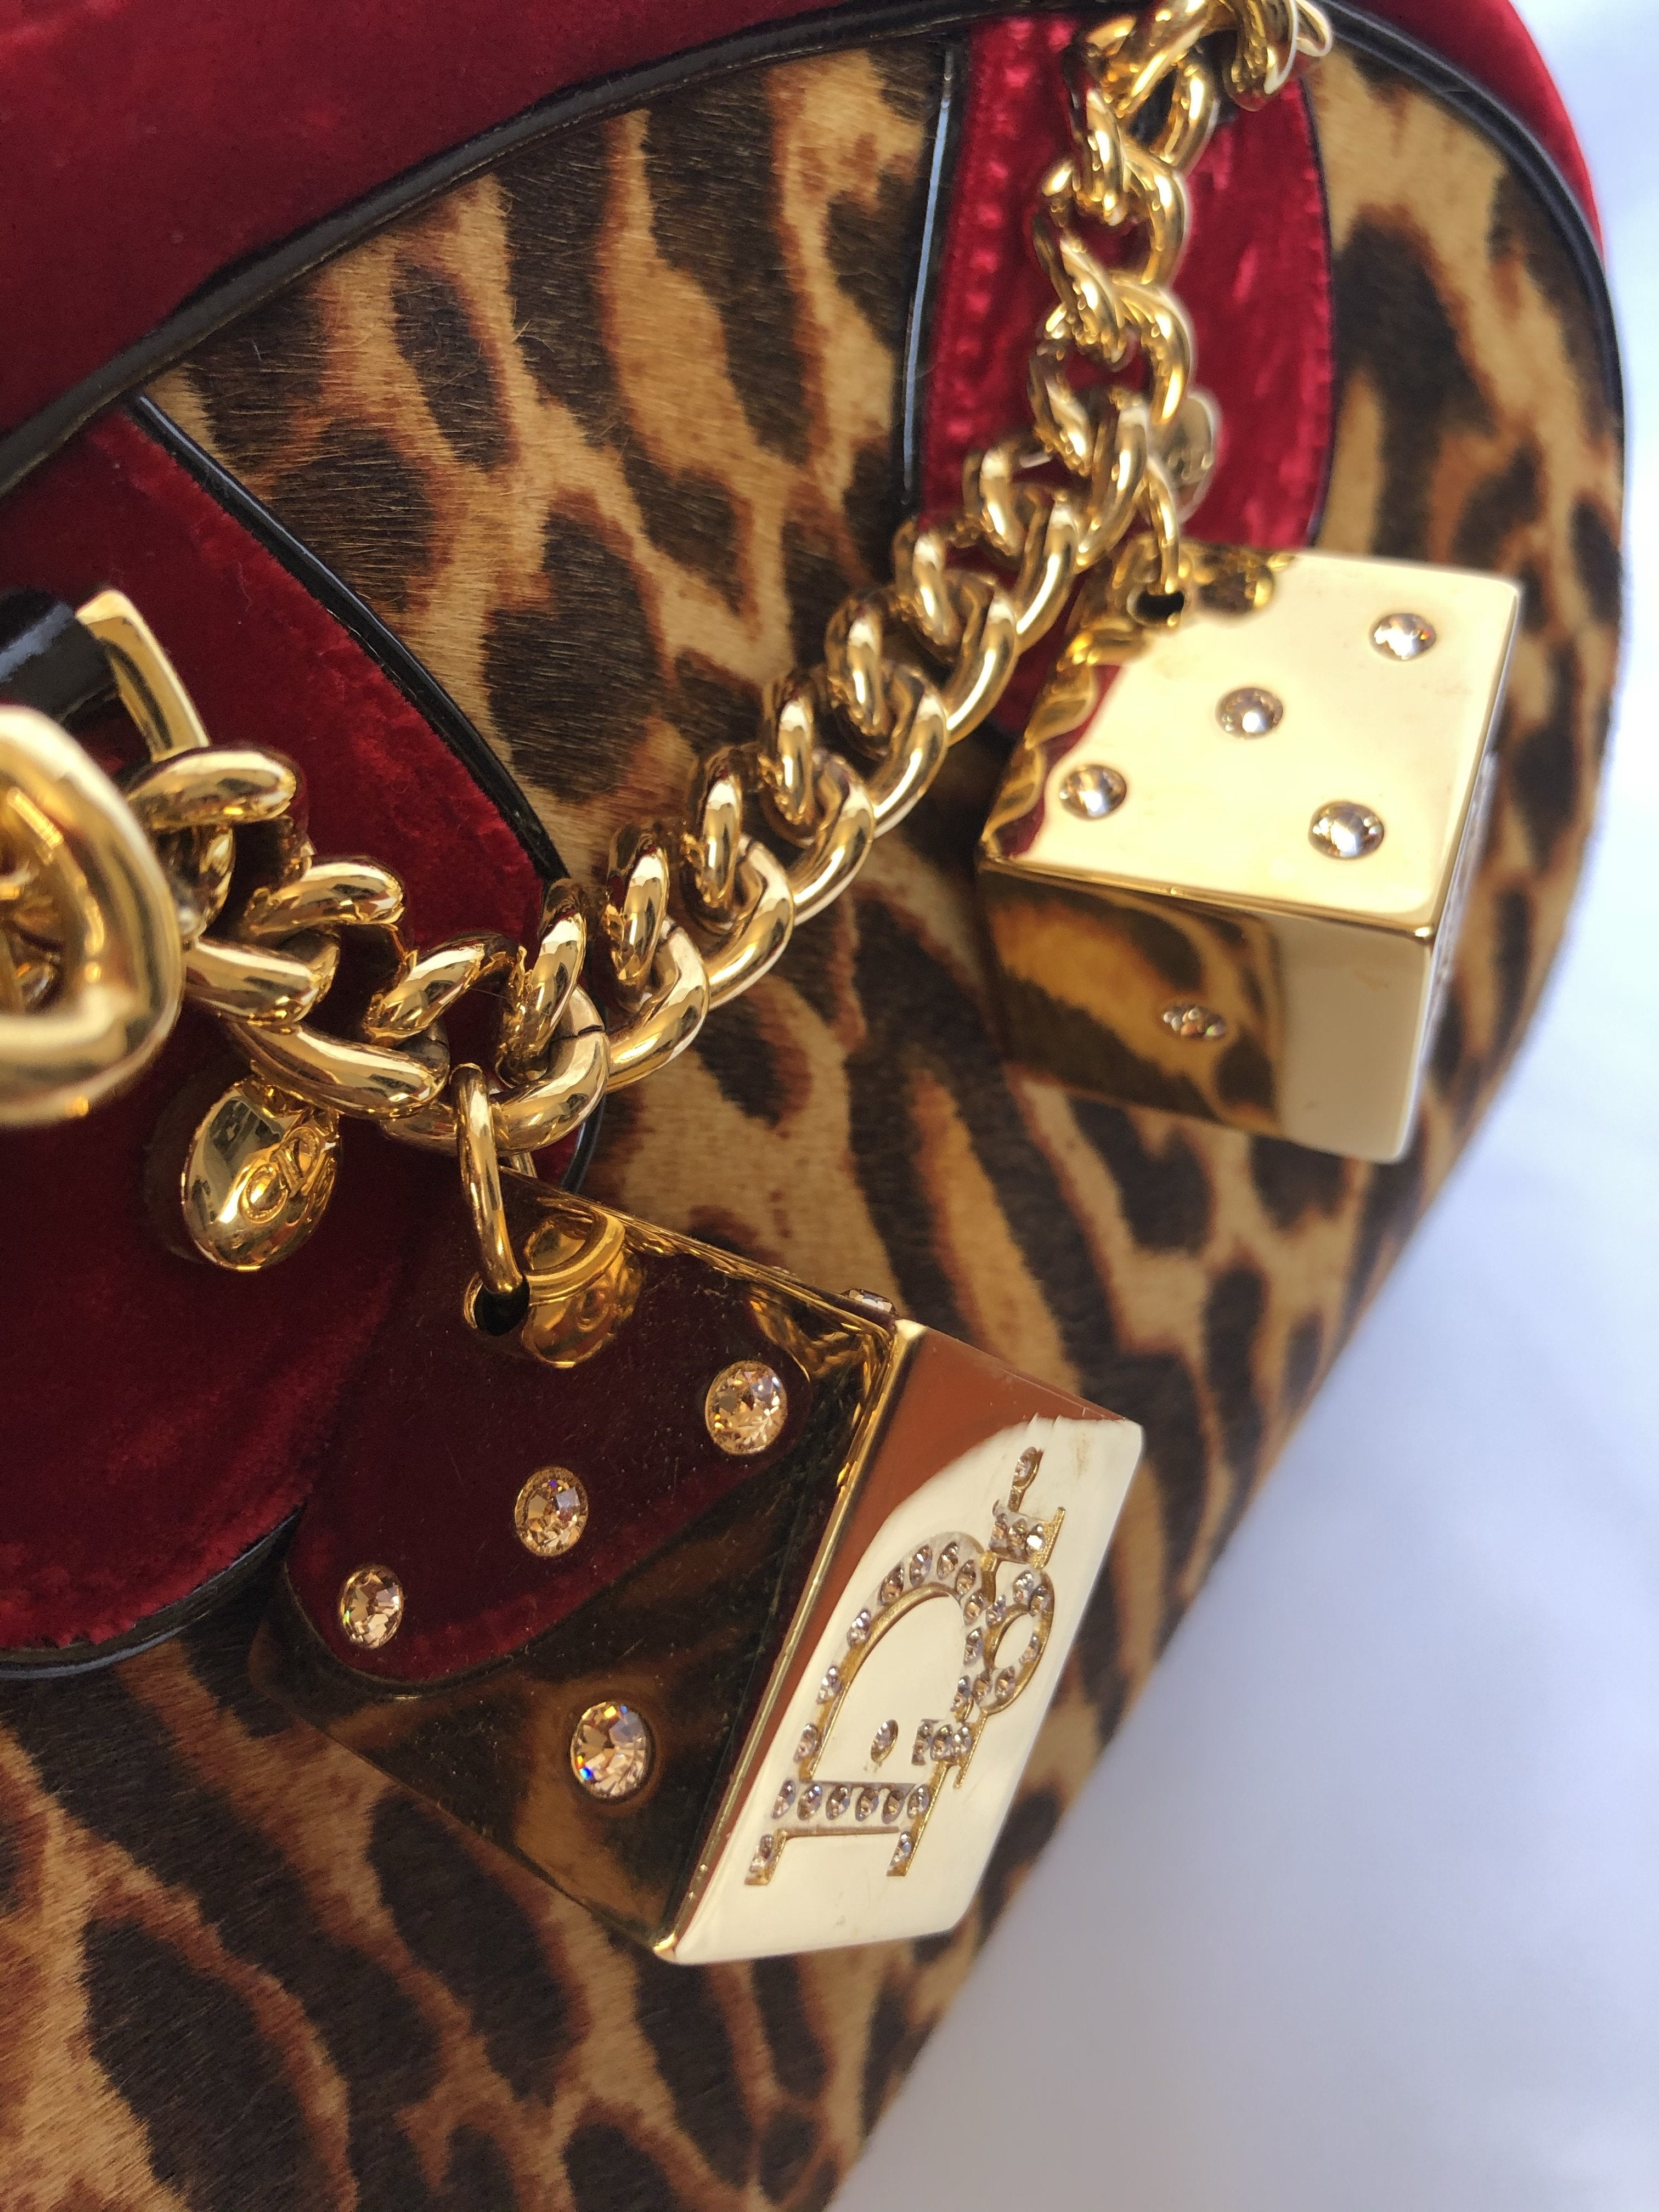 Christian Dior Bowler Bag with Dice Details